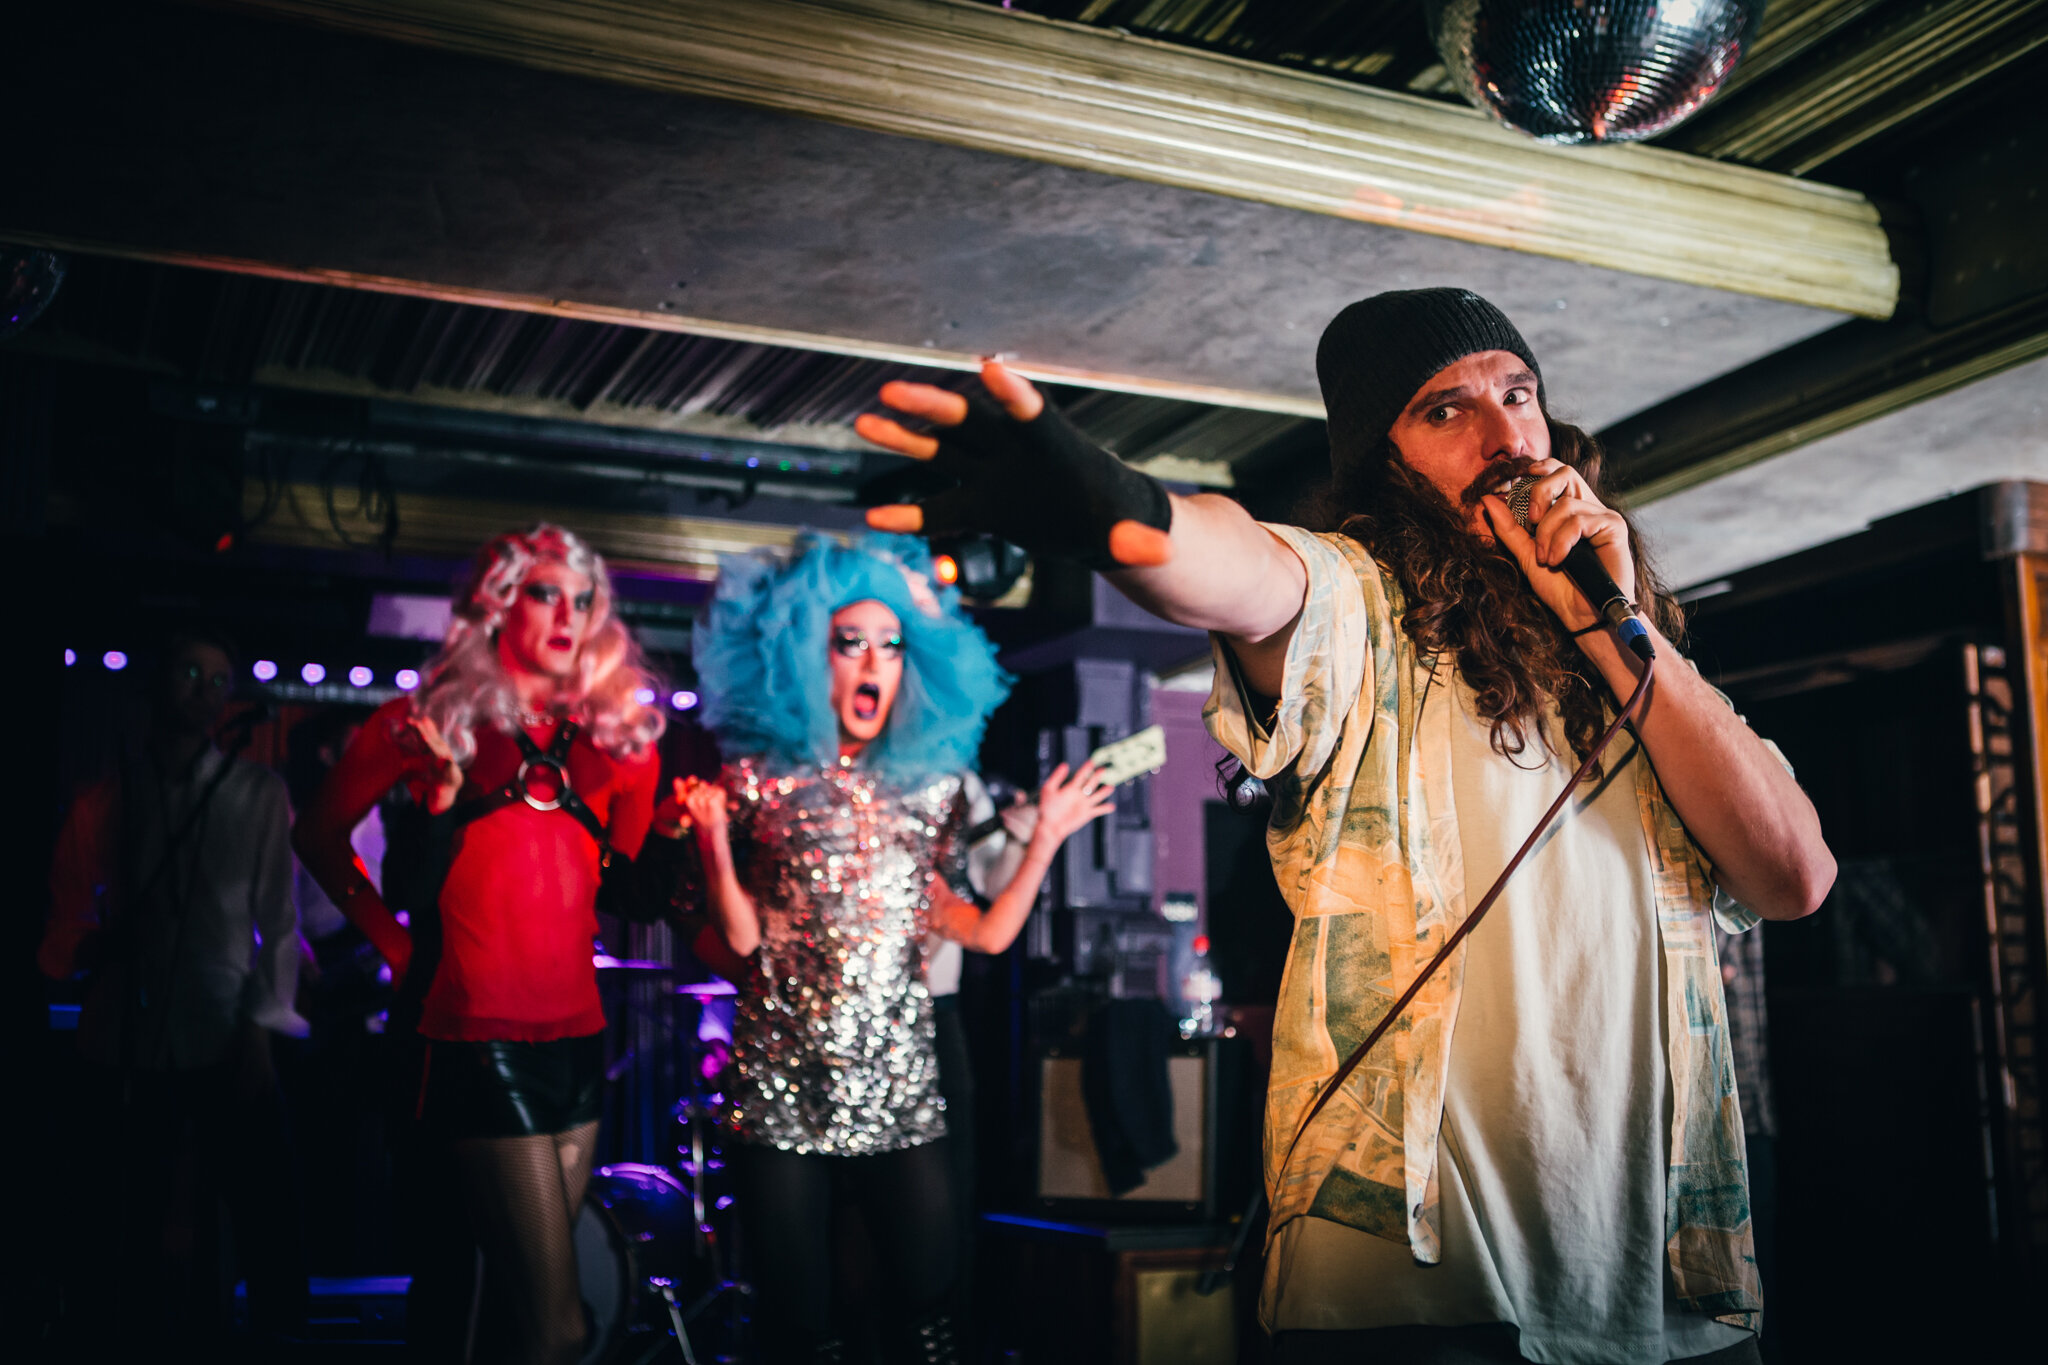  bearded man singing into microphone in front of two drag queens with a band in a club 